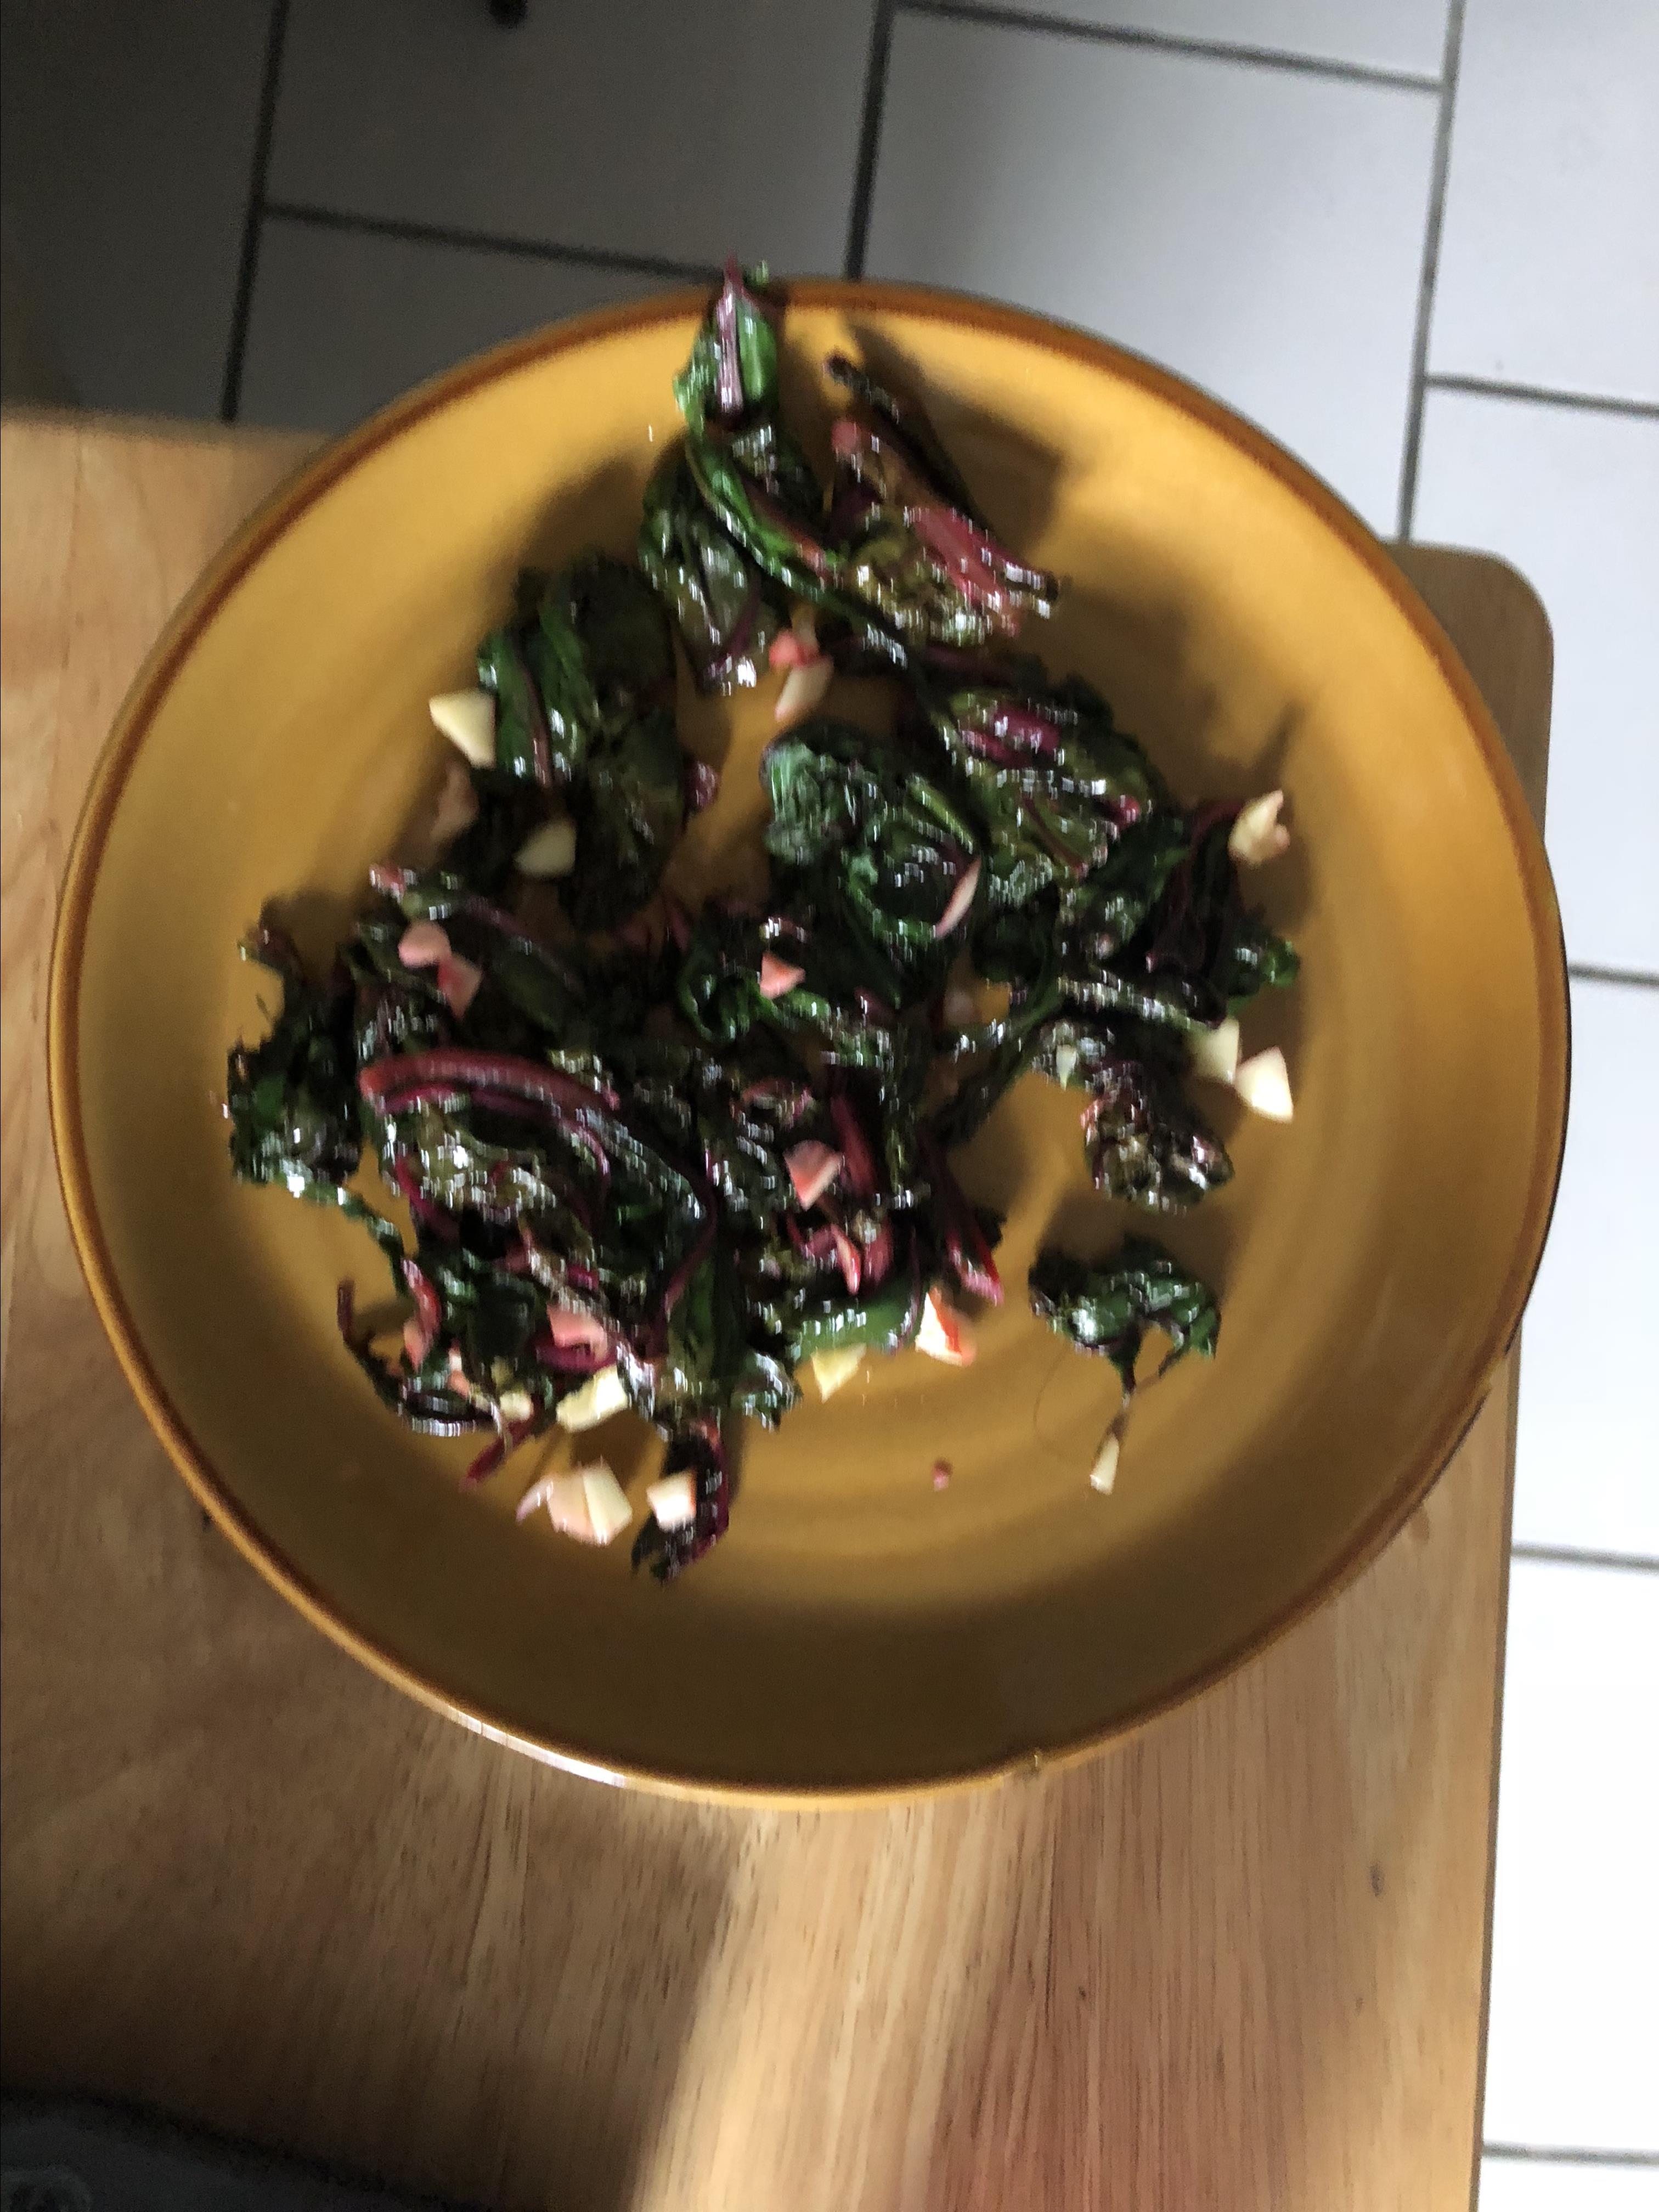 Simple and Delicious Beet Greens 